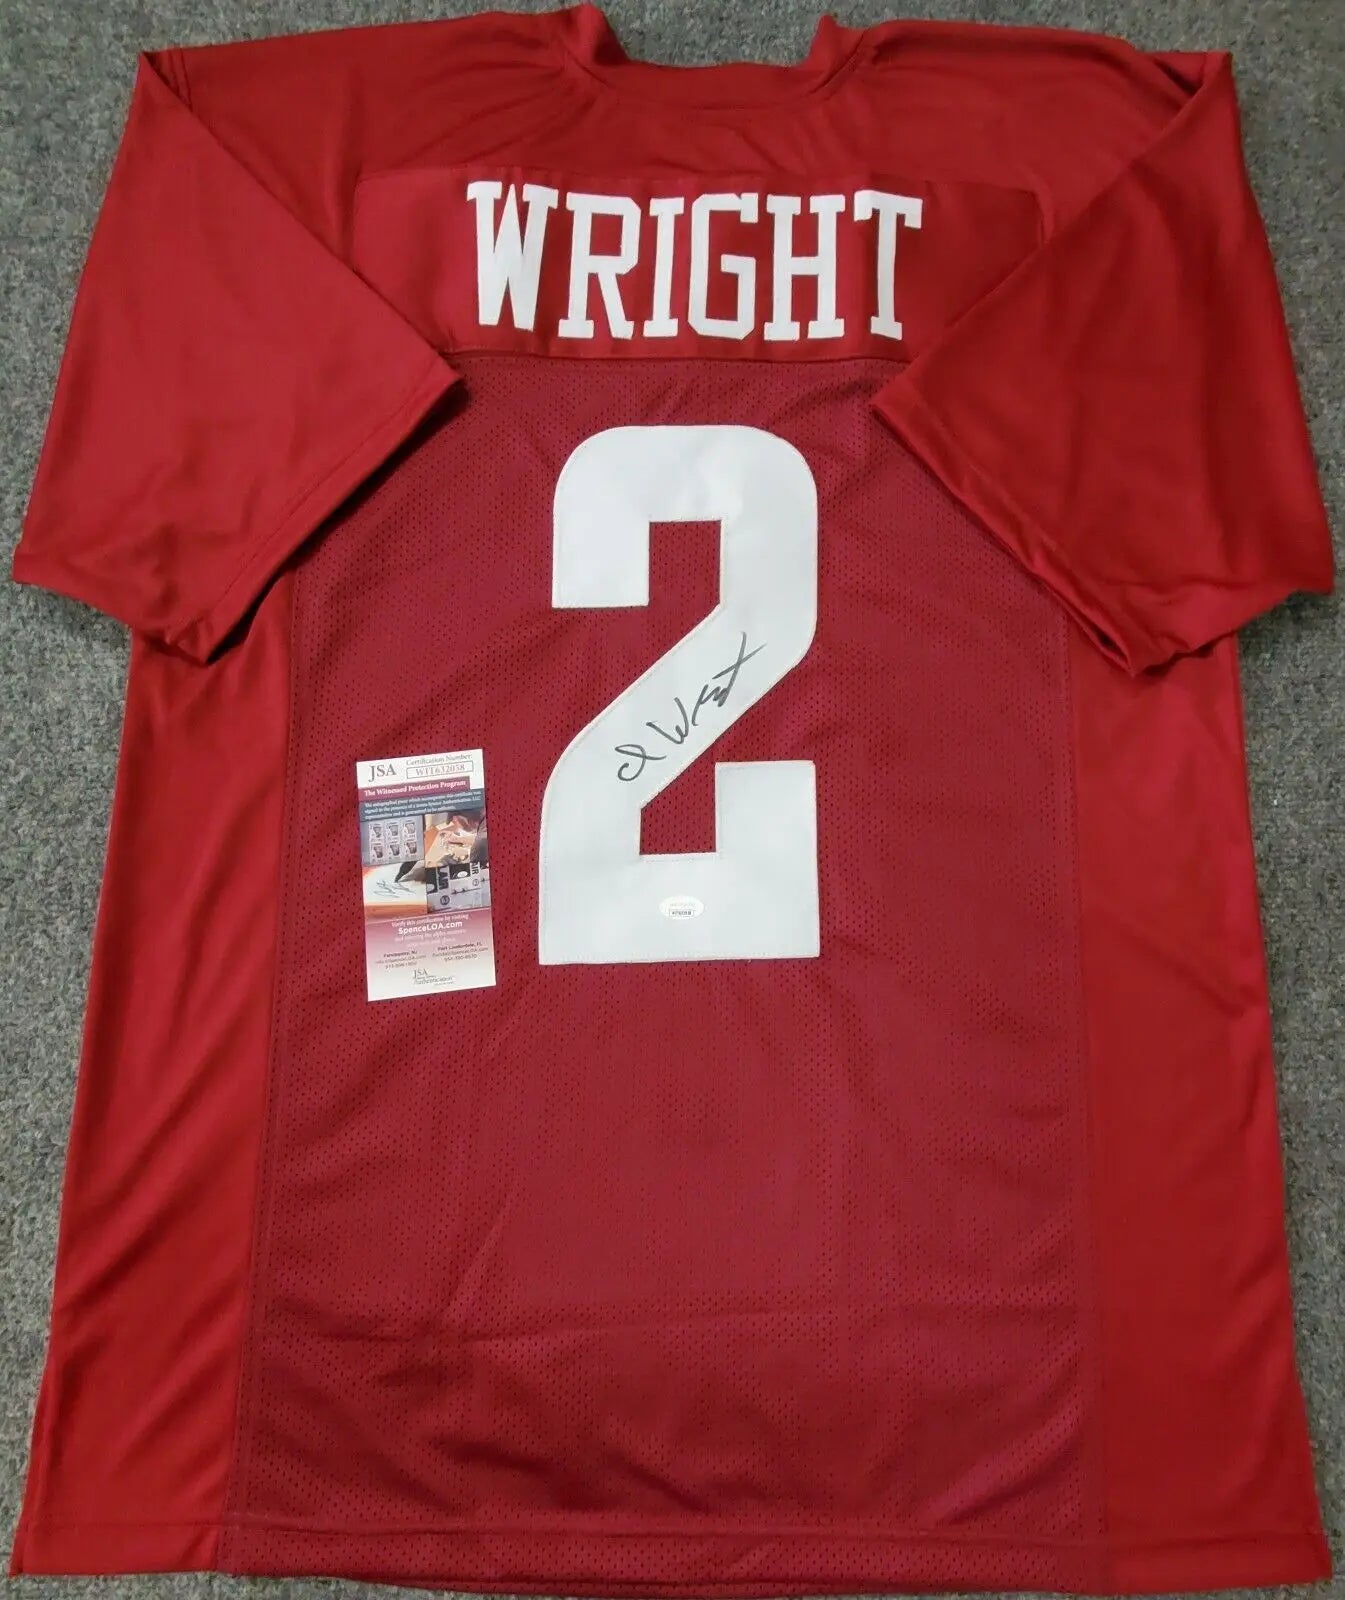 MVP Authentics Temple Owls Isaiah Wright Autographed Signed Jersey Jsa Coa 107.10 sports jersey framing , jersey framing